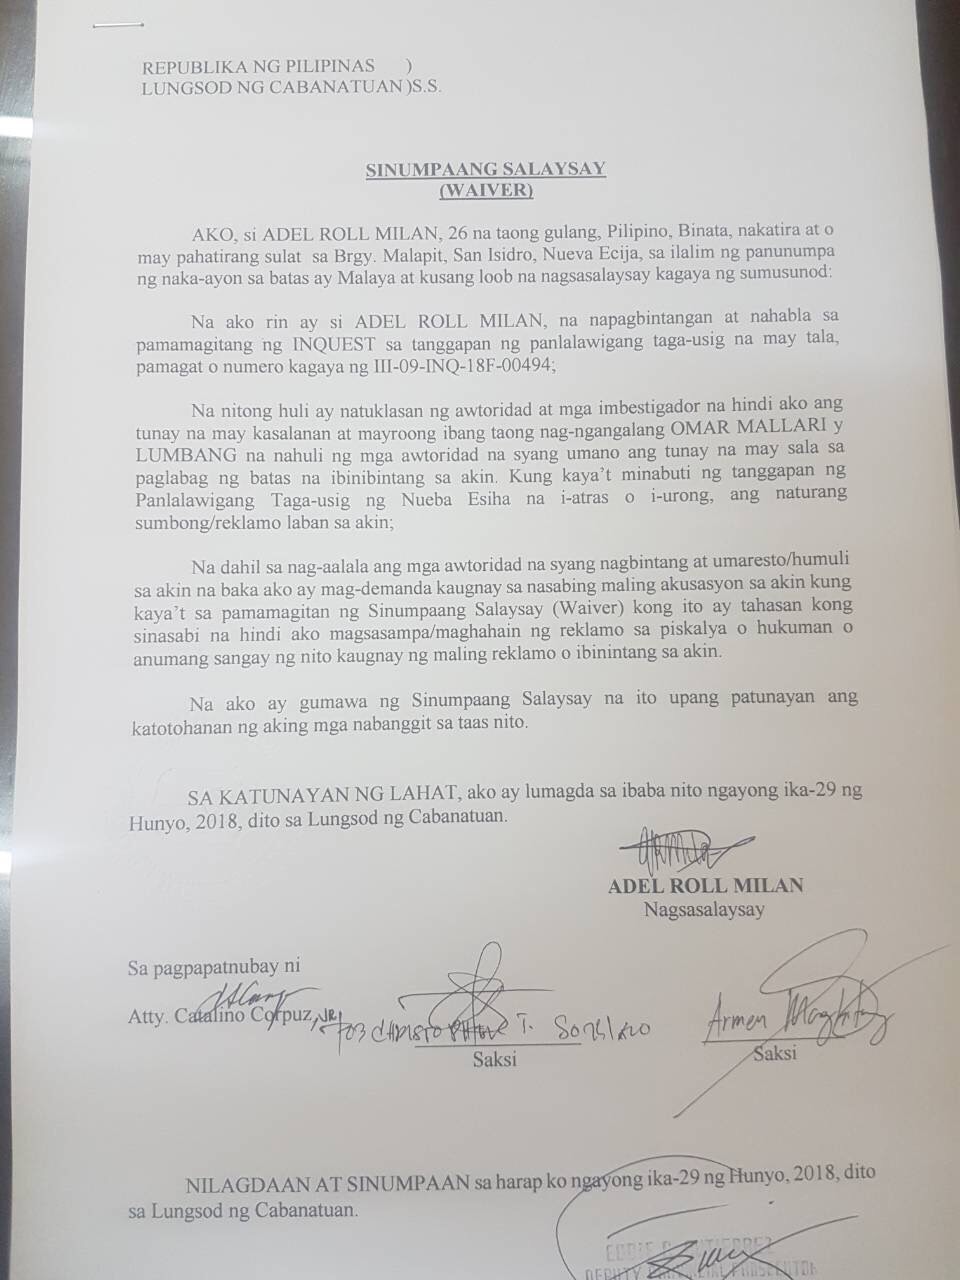 WAIVER. A photo the sworn statement of Adel Millan.  